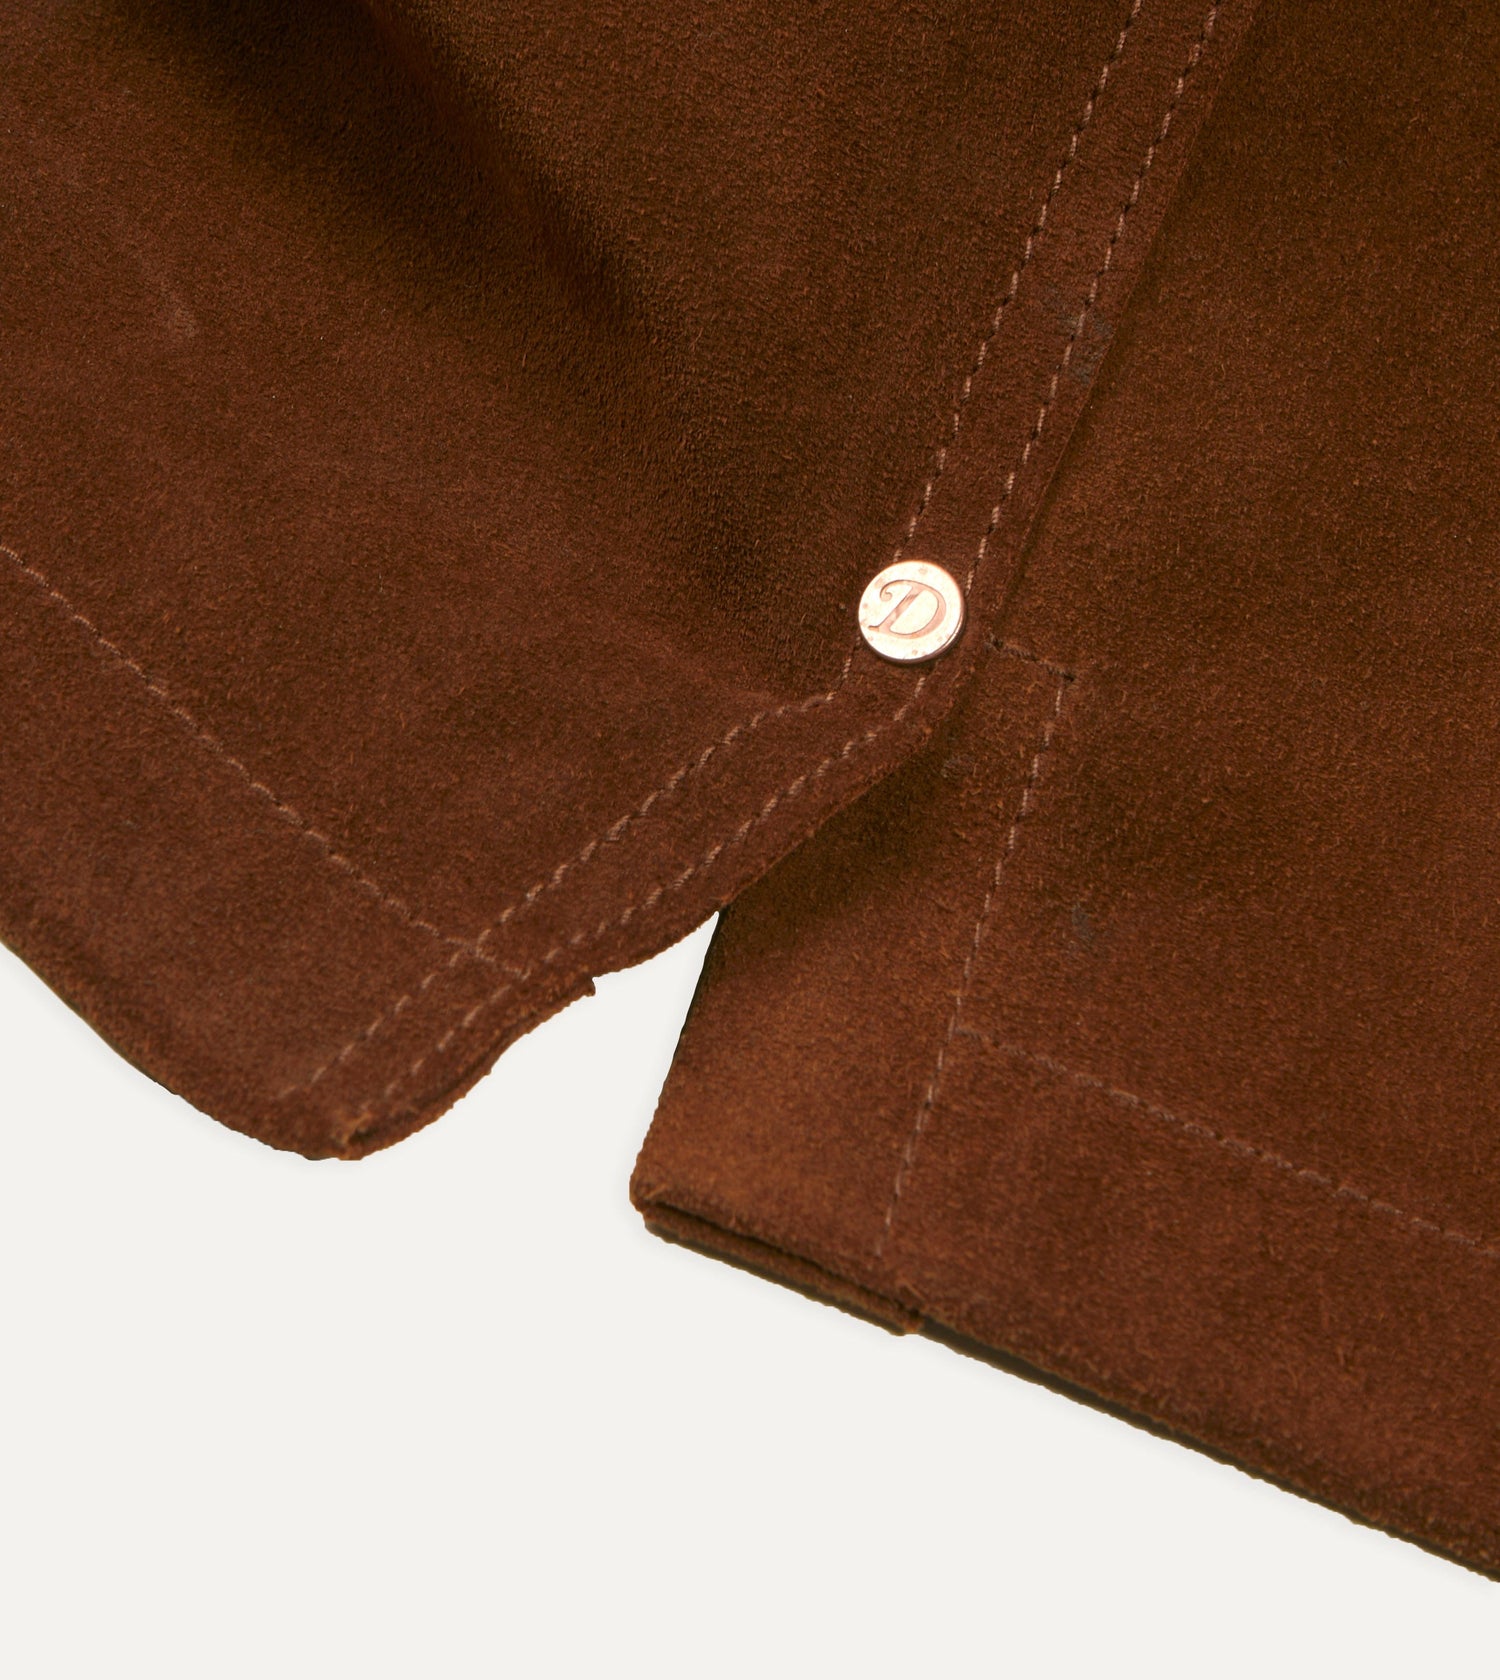 Brown Roughout Suede Overshirt